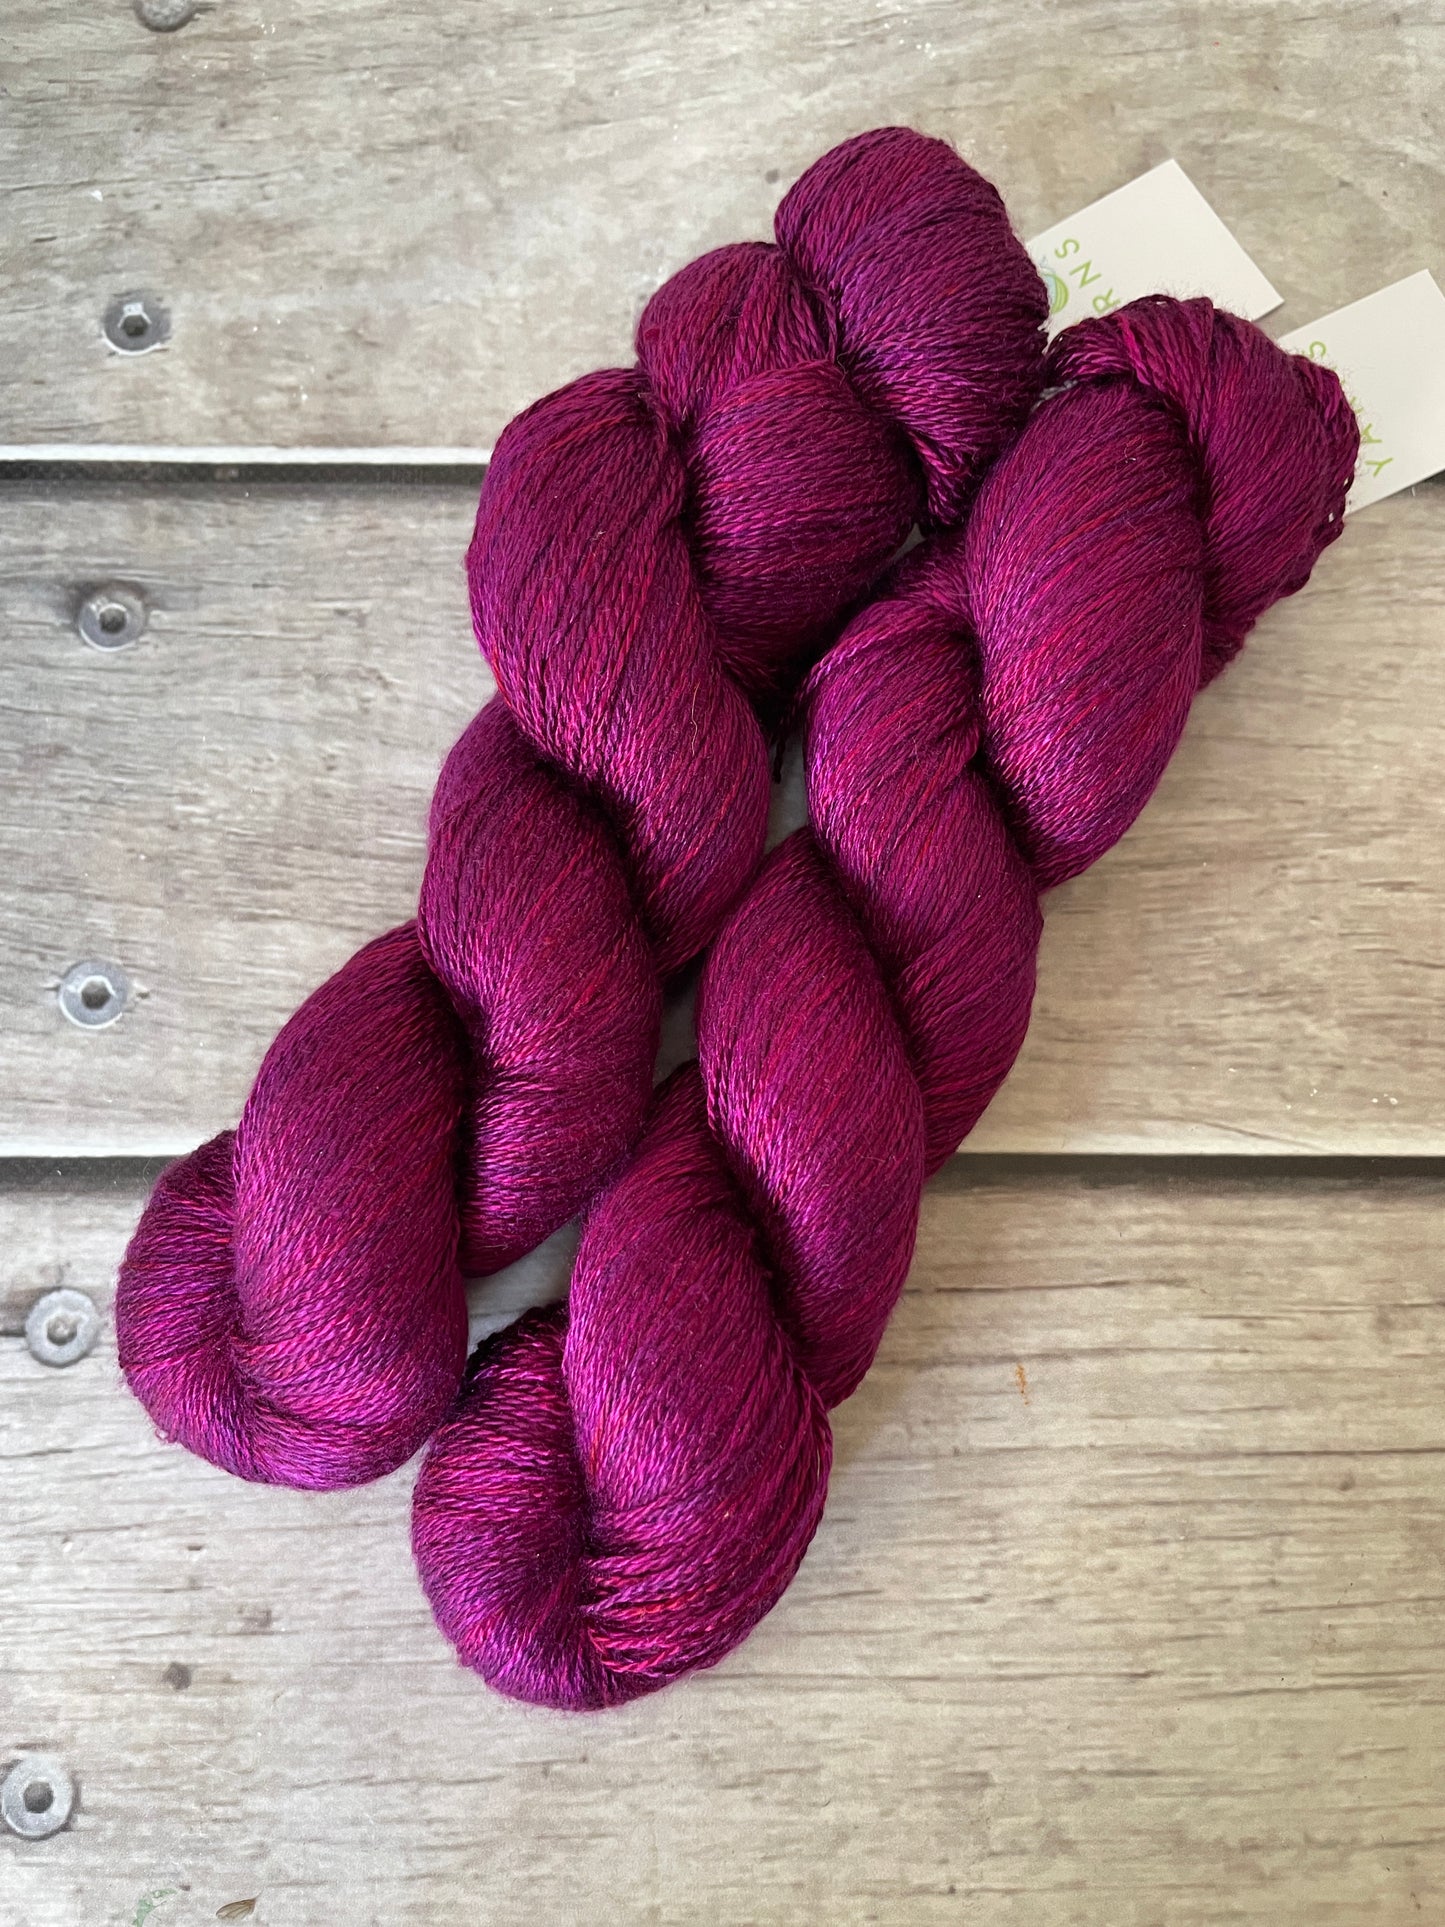 Wild Orchid - 3 ply in Mulberry silk - Pekoe hl